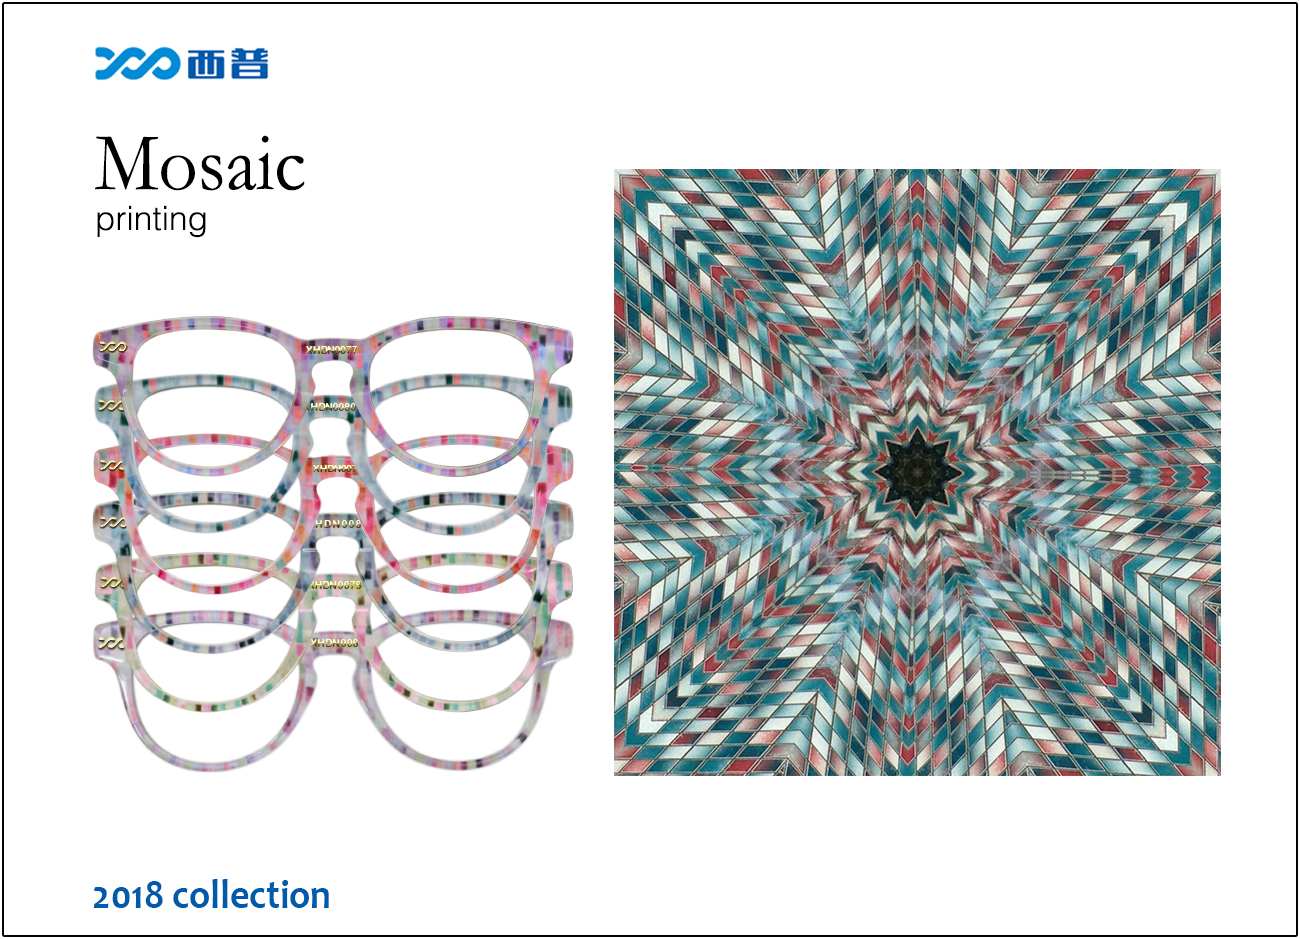 2018 collection of Mosaic